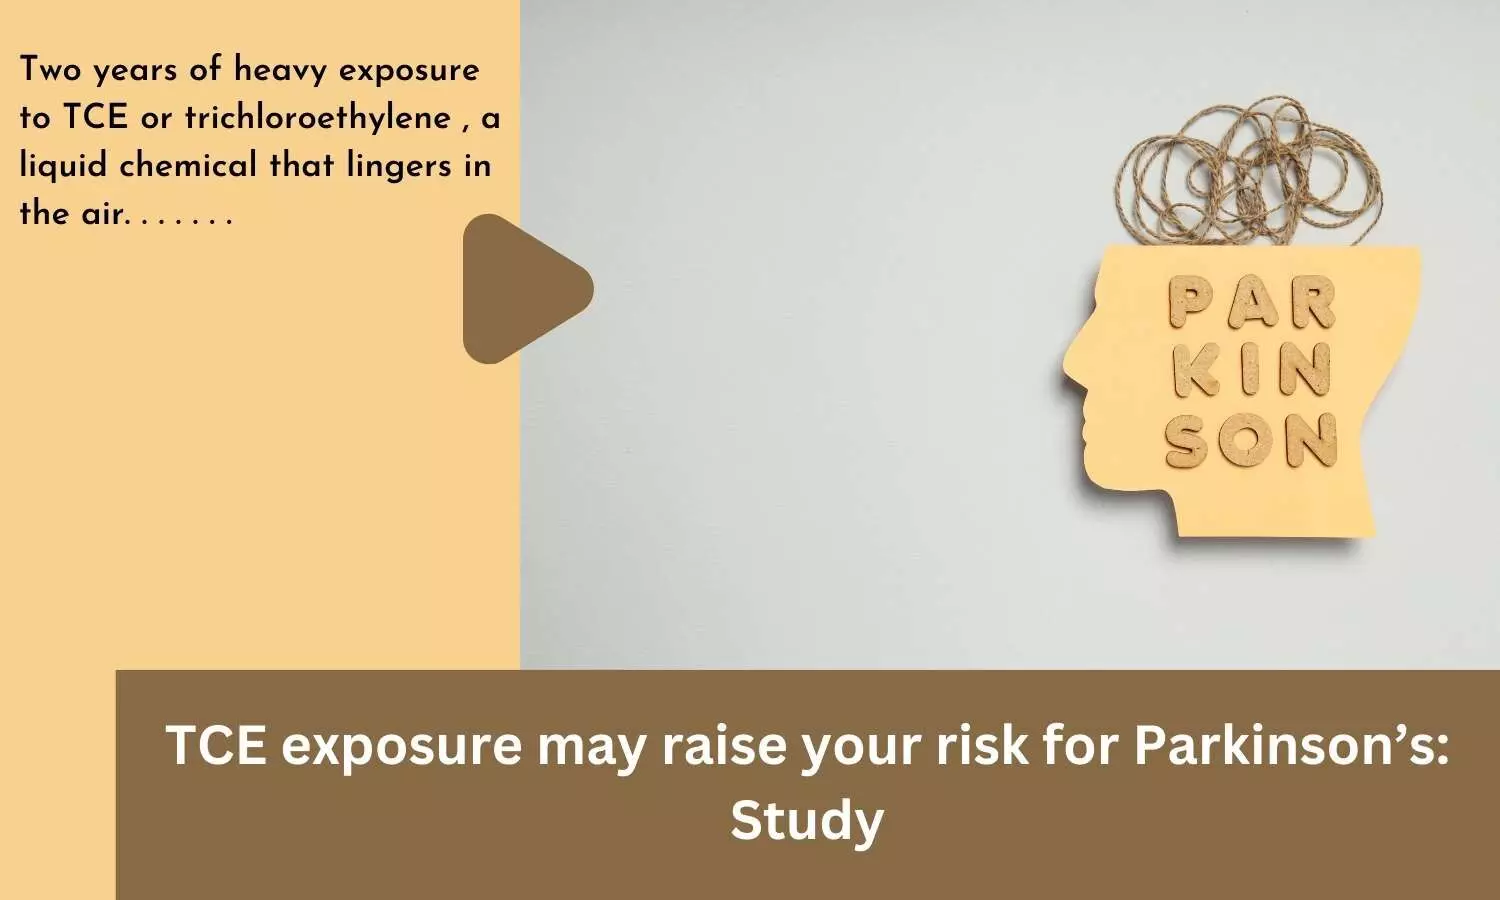 TCE exposure may raise your risk for Parkinsons: Study